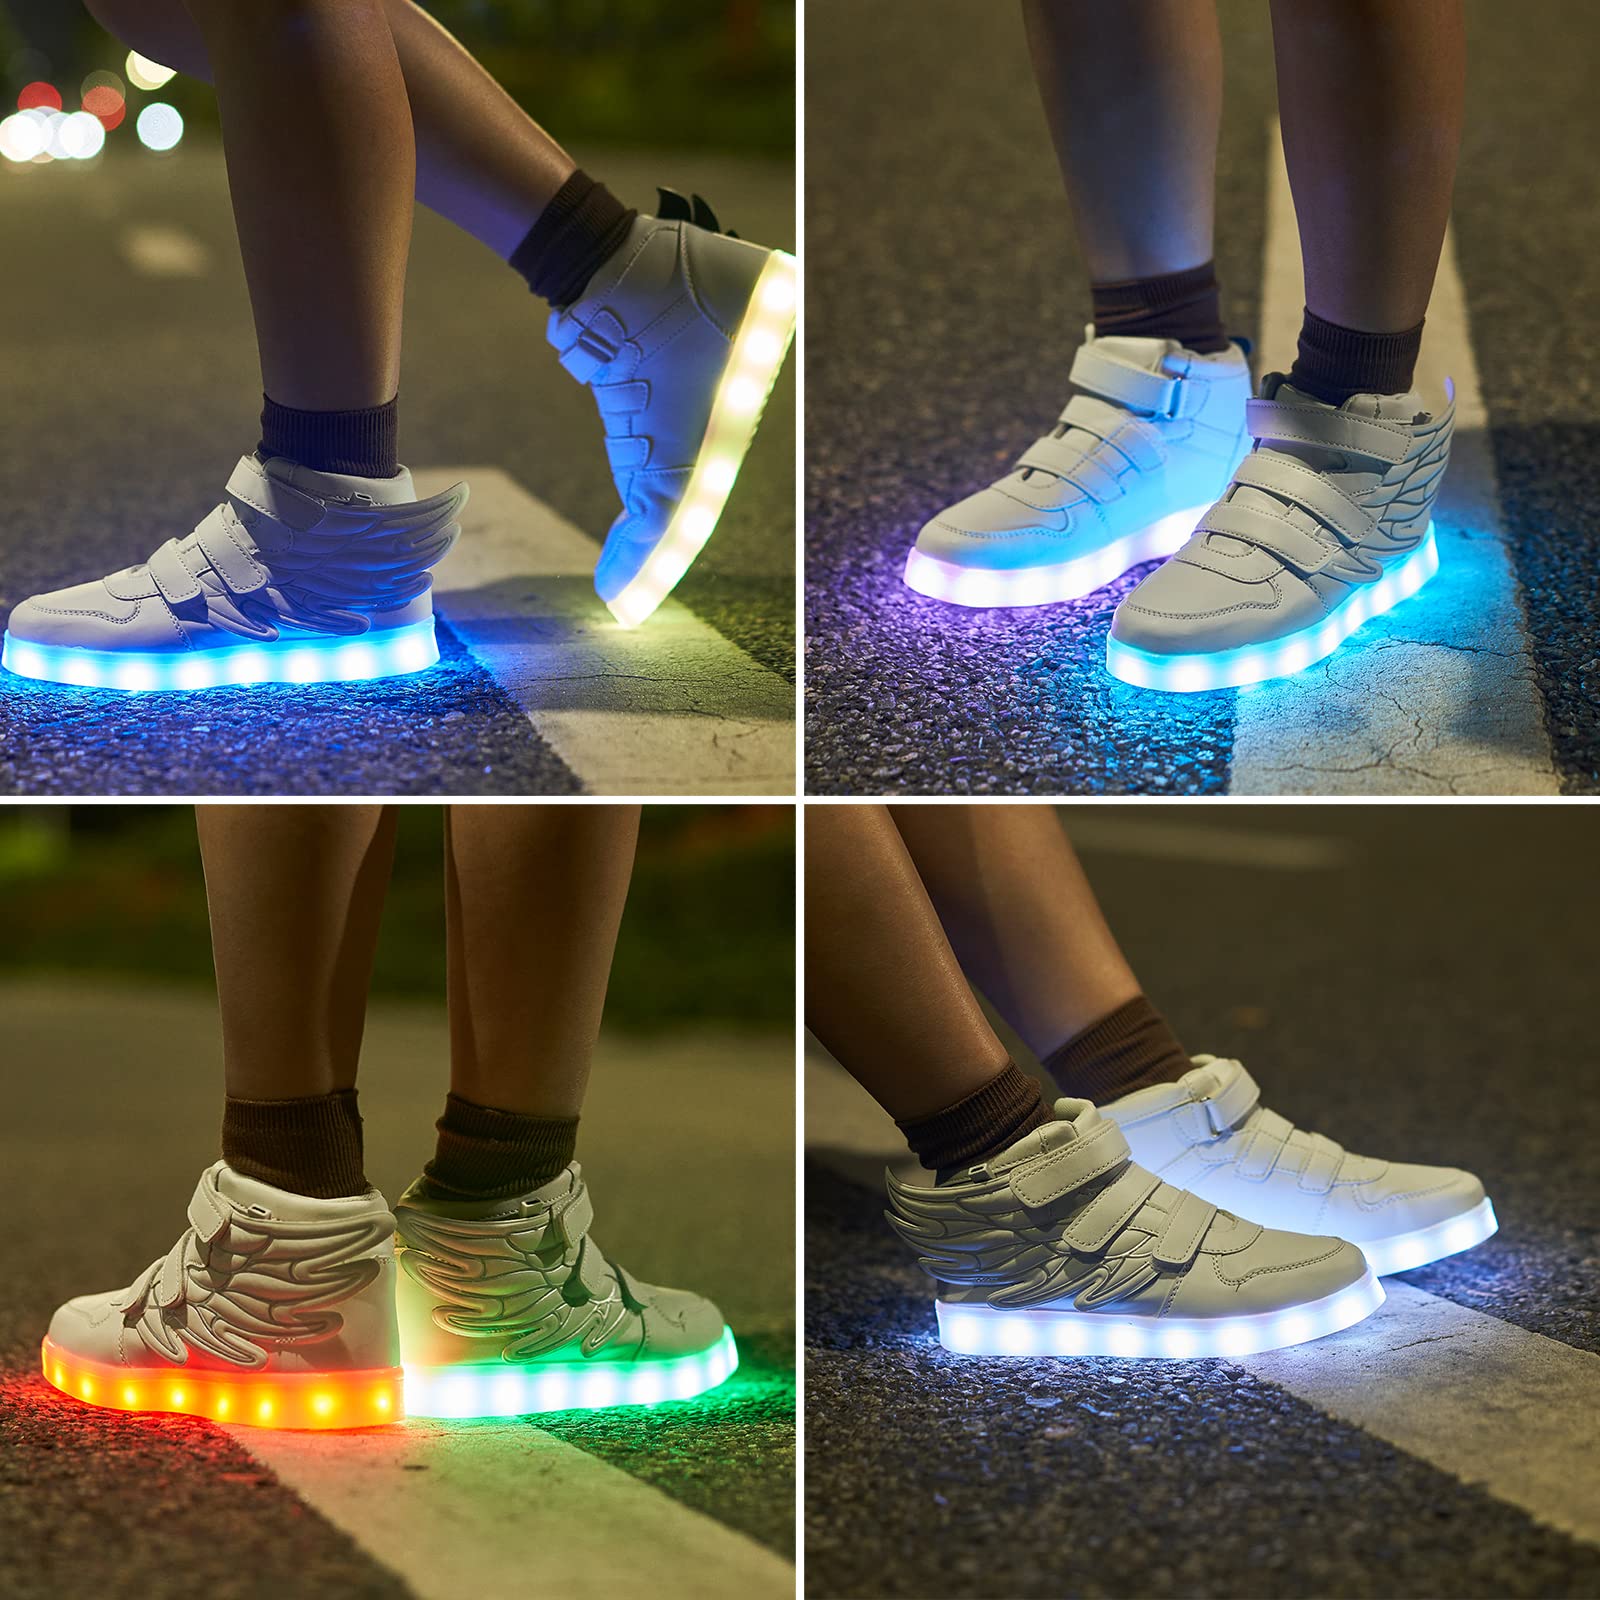 LED Light Up Shoes with Flying Wings for Boys Girls Kids Hip-Top Flashing Sneakers for Festivals, Party, Christmas, Halloween,Friend Gift with USB Charging, White 36